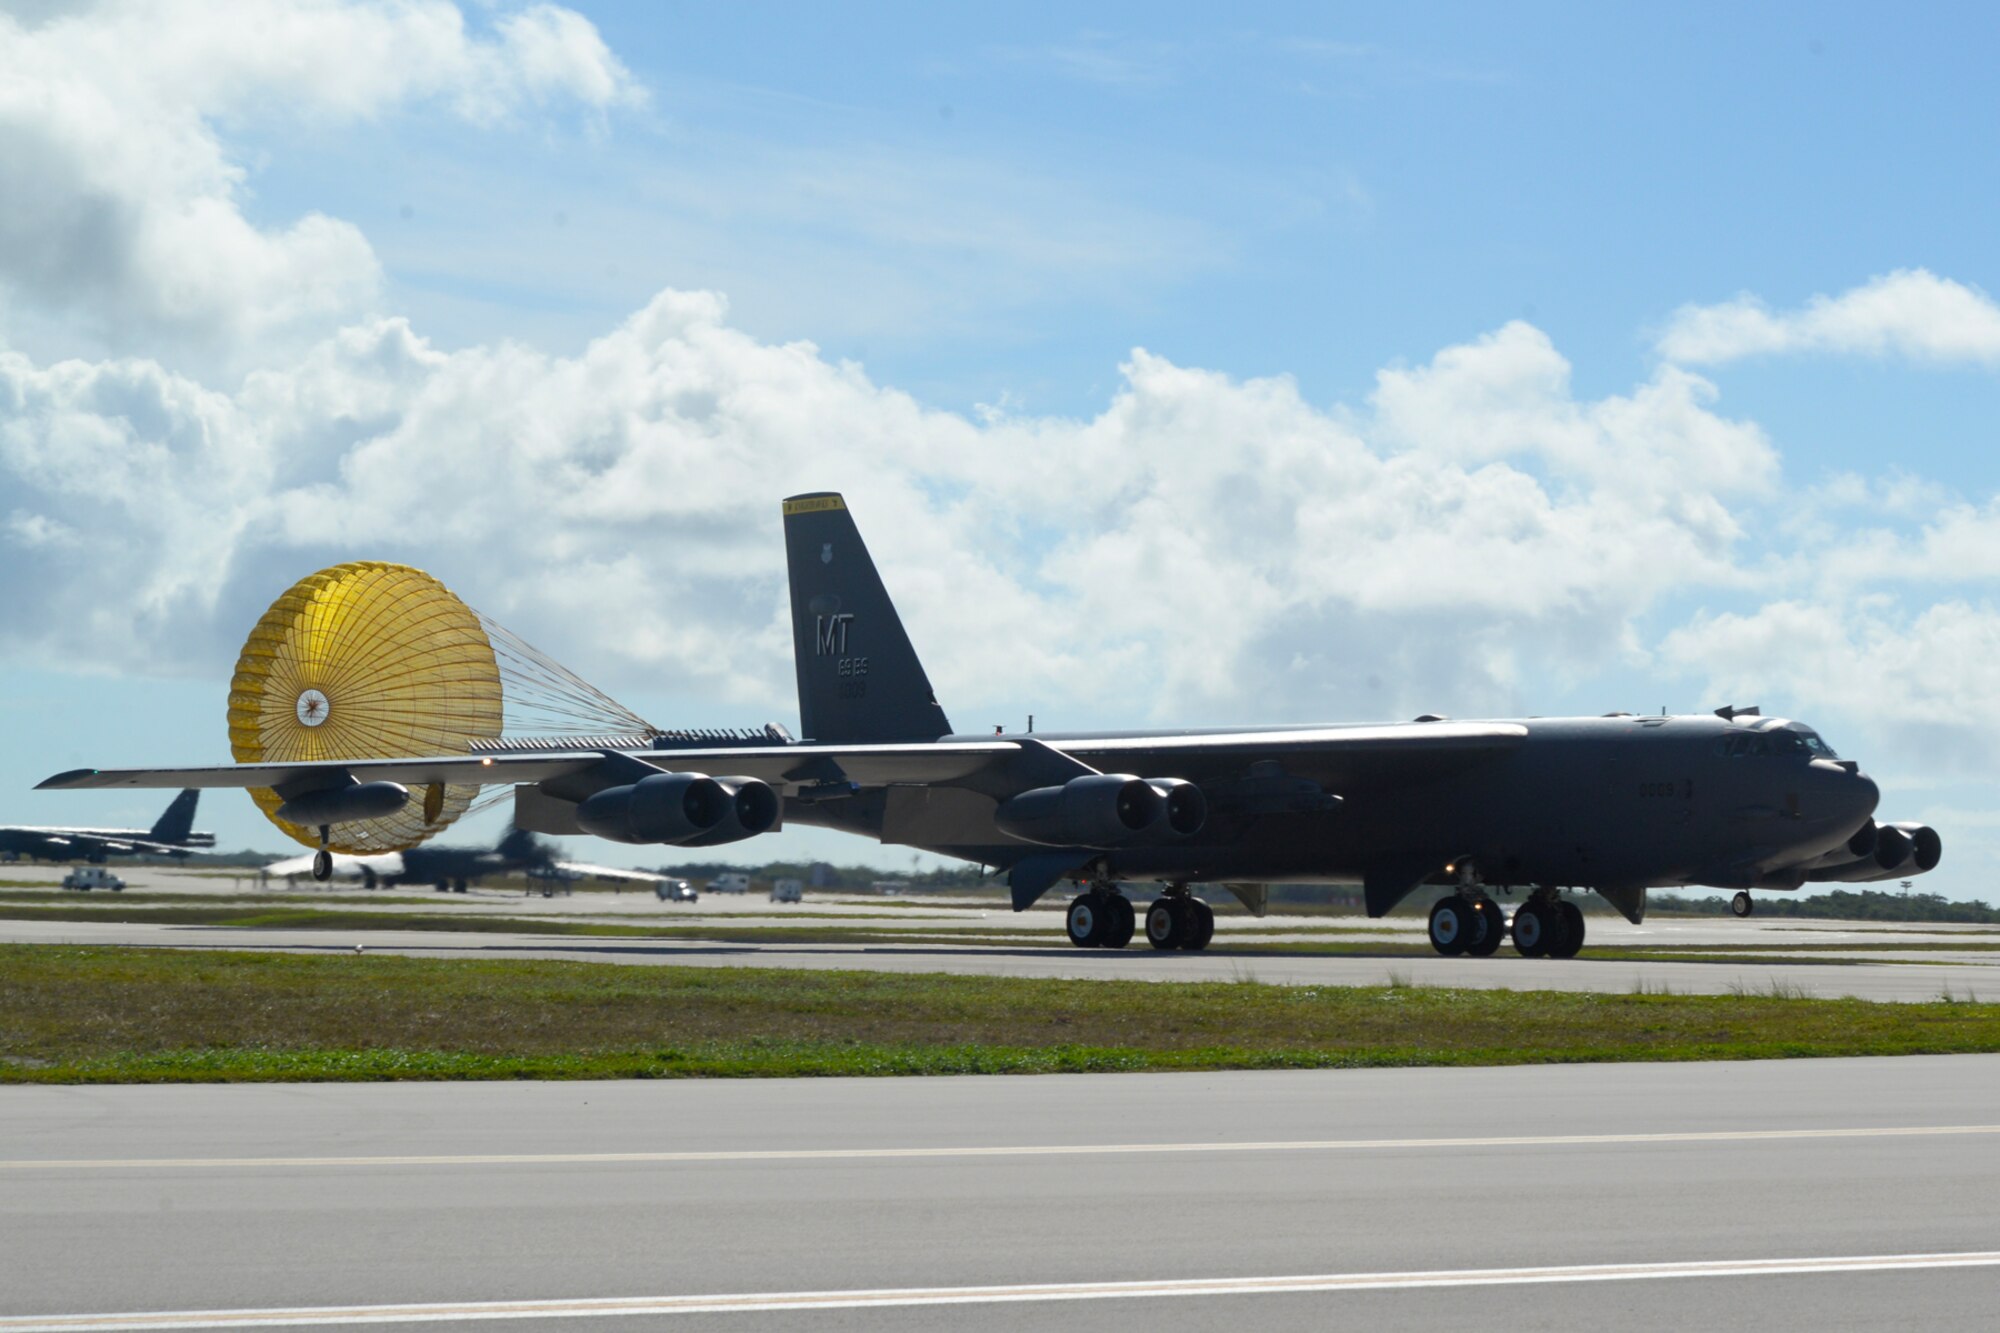 A U.S Air Force B-52 Stratofortress bomber from Minot Air Force Base, North Dakota, lands June 15, 2016, at Andersen Air Force Base, Guam. The aircraft is deployed in support of U.S. Pacific Command’s Continuous Bomber Presence operations. (U.S. Air Force photo by Airman 1st Class Alexa Ann Henderson/Released)